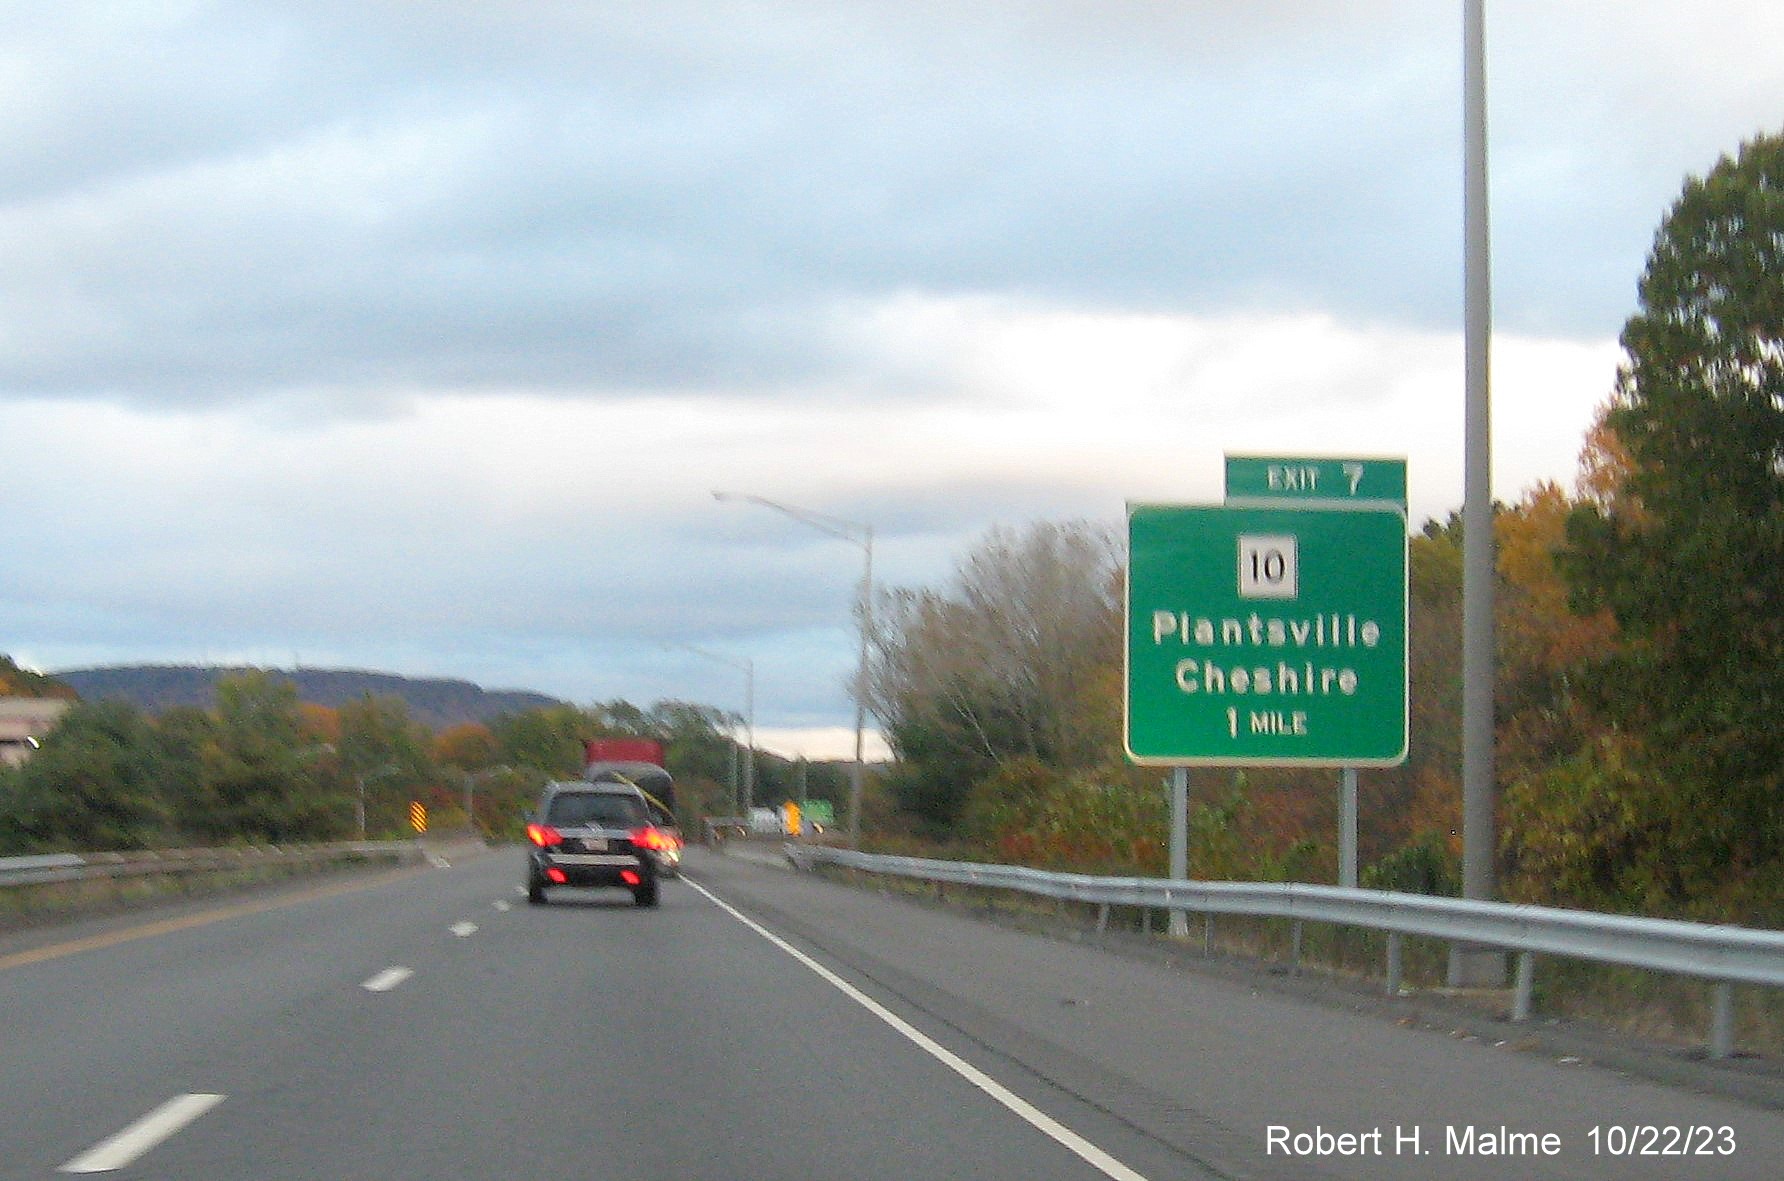 Image of new 1 mile advance sign for CT 10 exit with milepost based exit number on I-691 East in Cheshire, October 2023